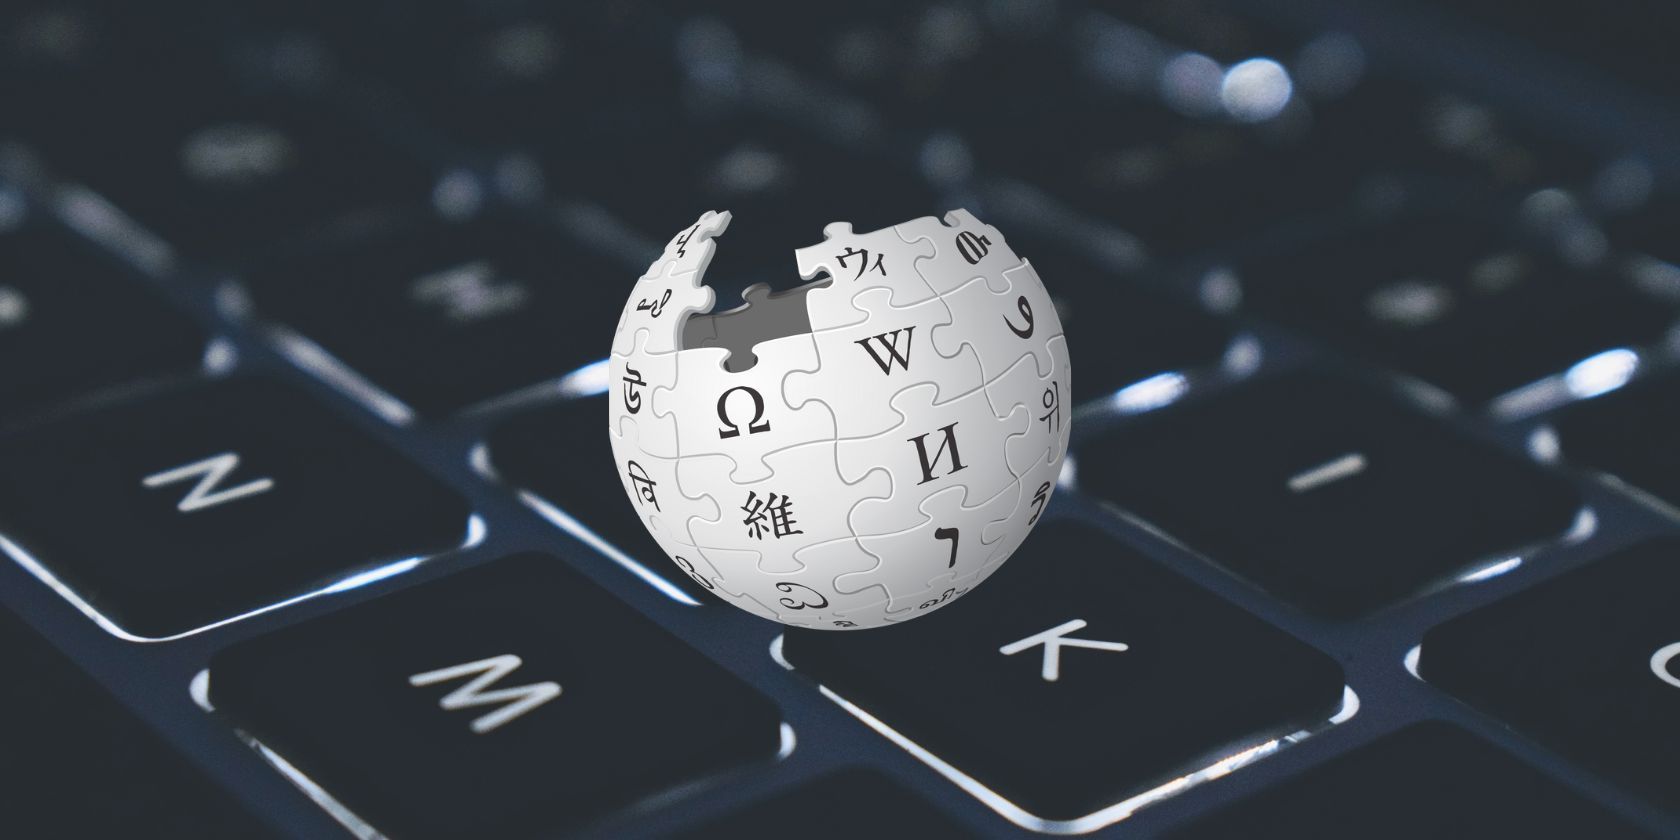 An image of the Wikipedia logo in front of a keyboard background